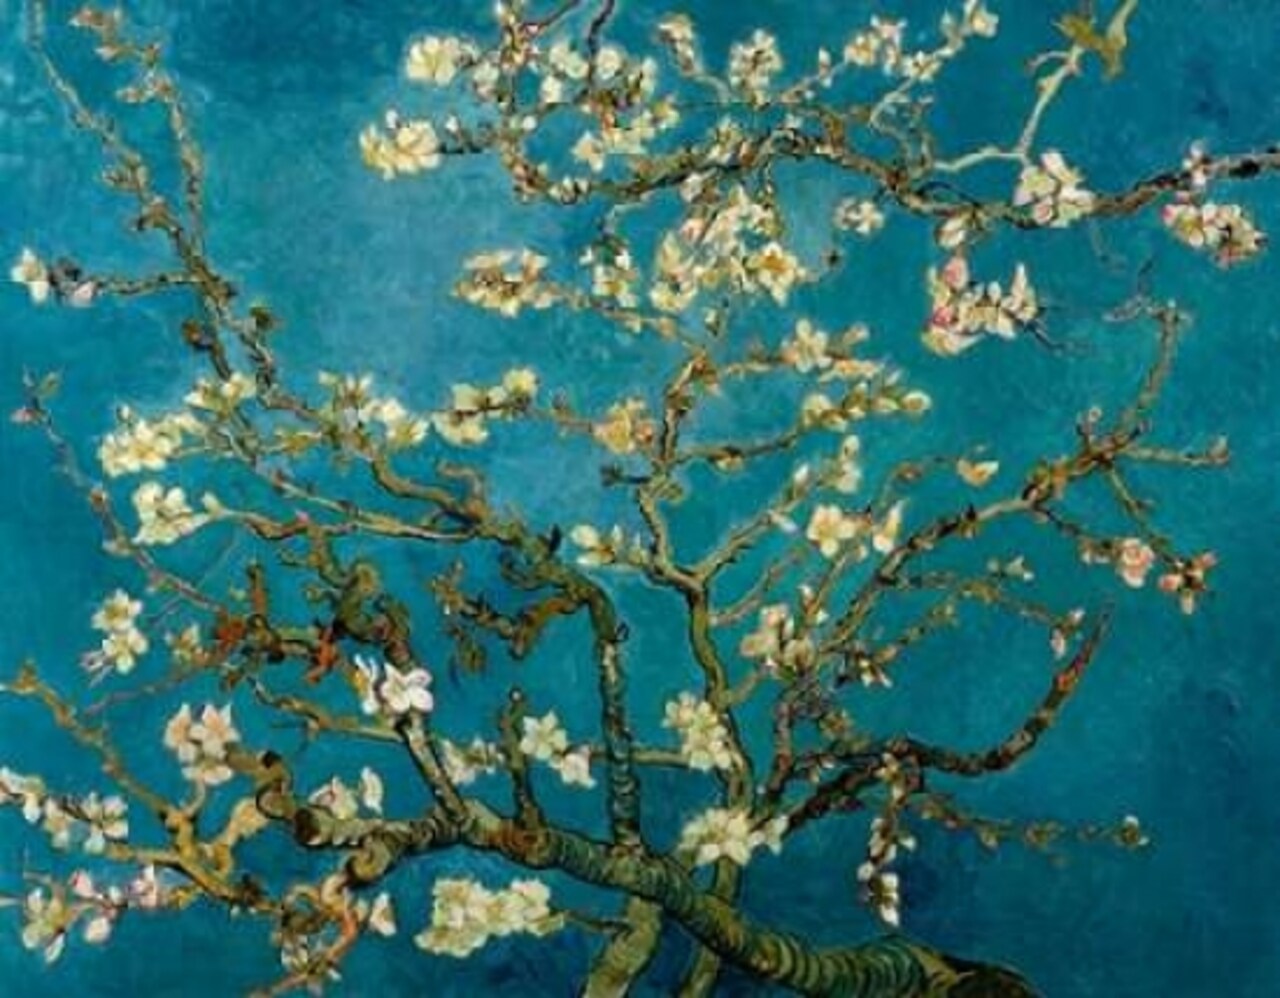 Blossoming Almond Tree Poster Print by  Vincent Van Gogh - Item # VARPDX374611